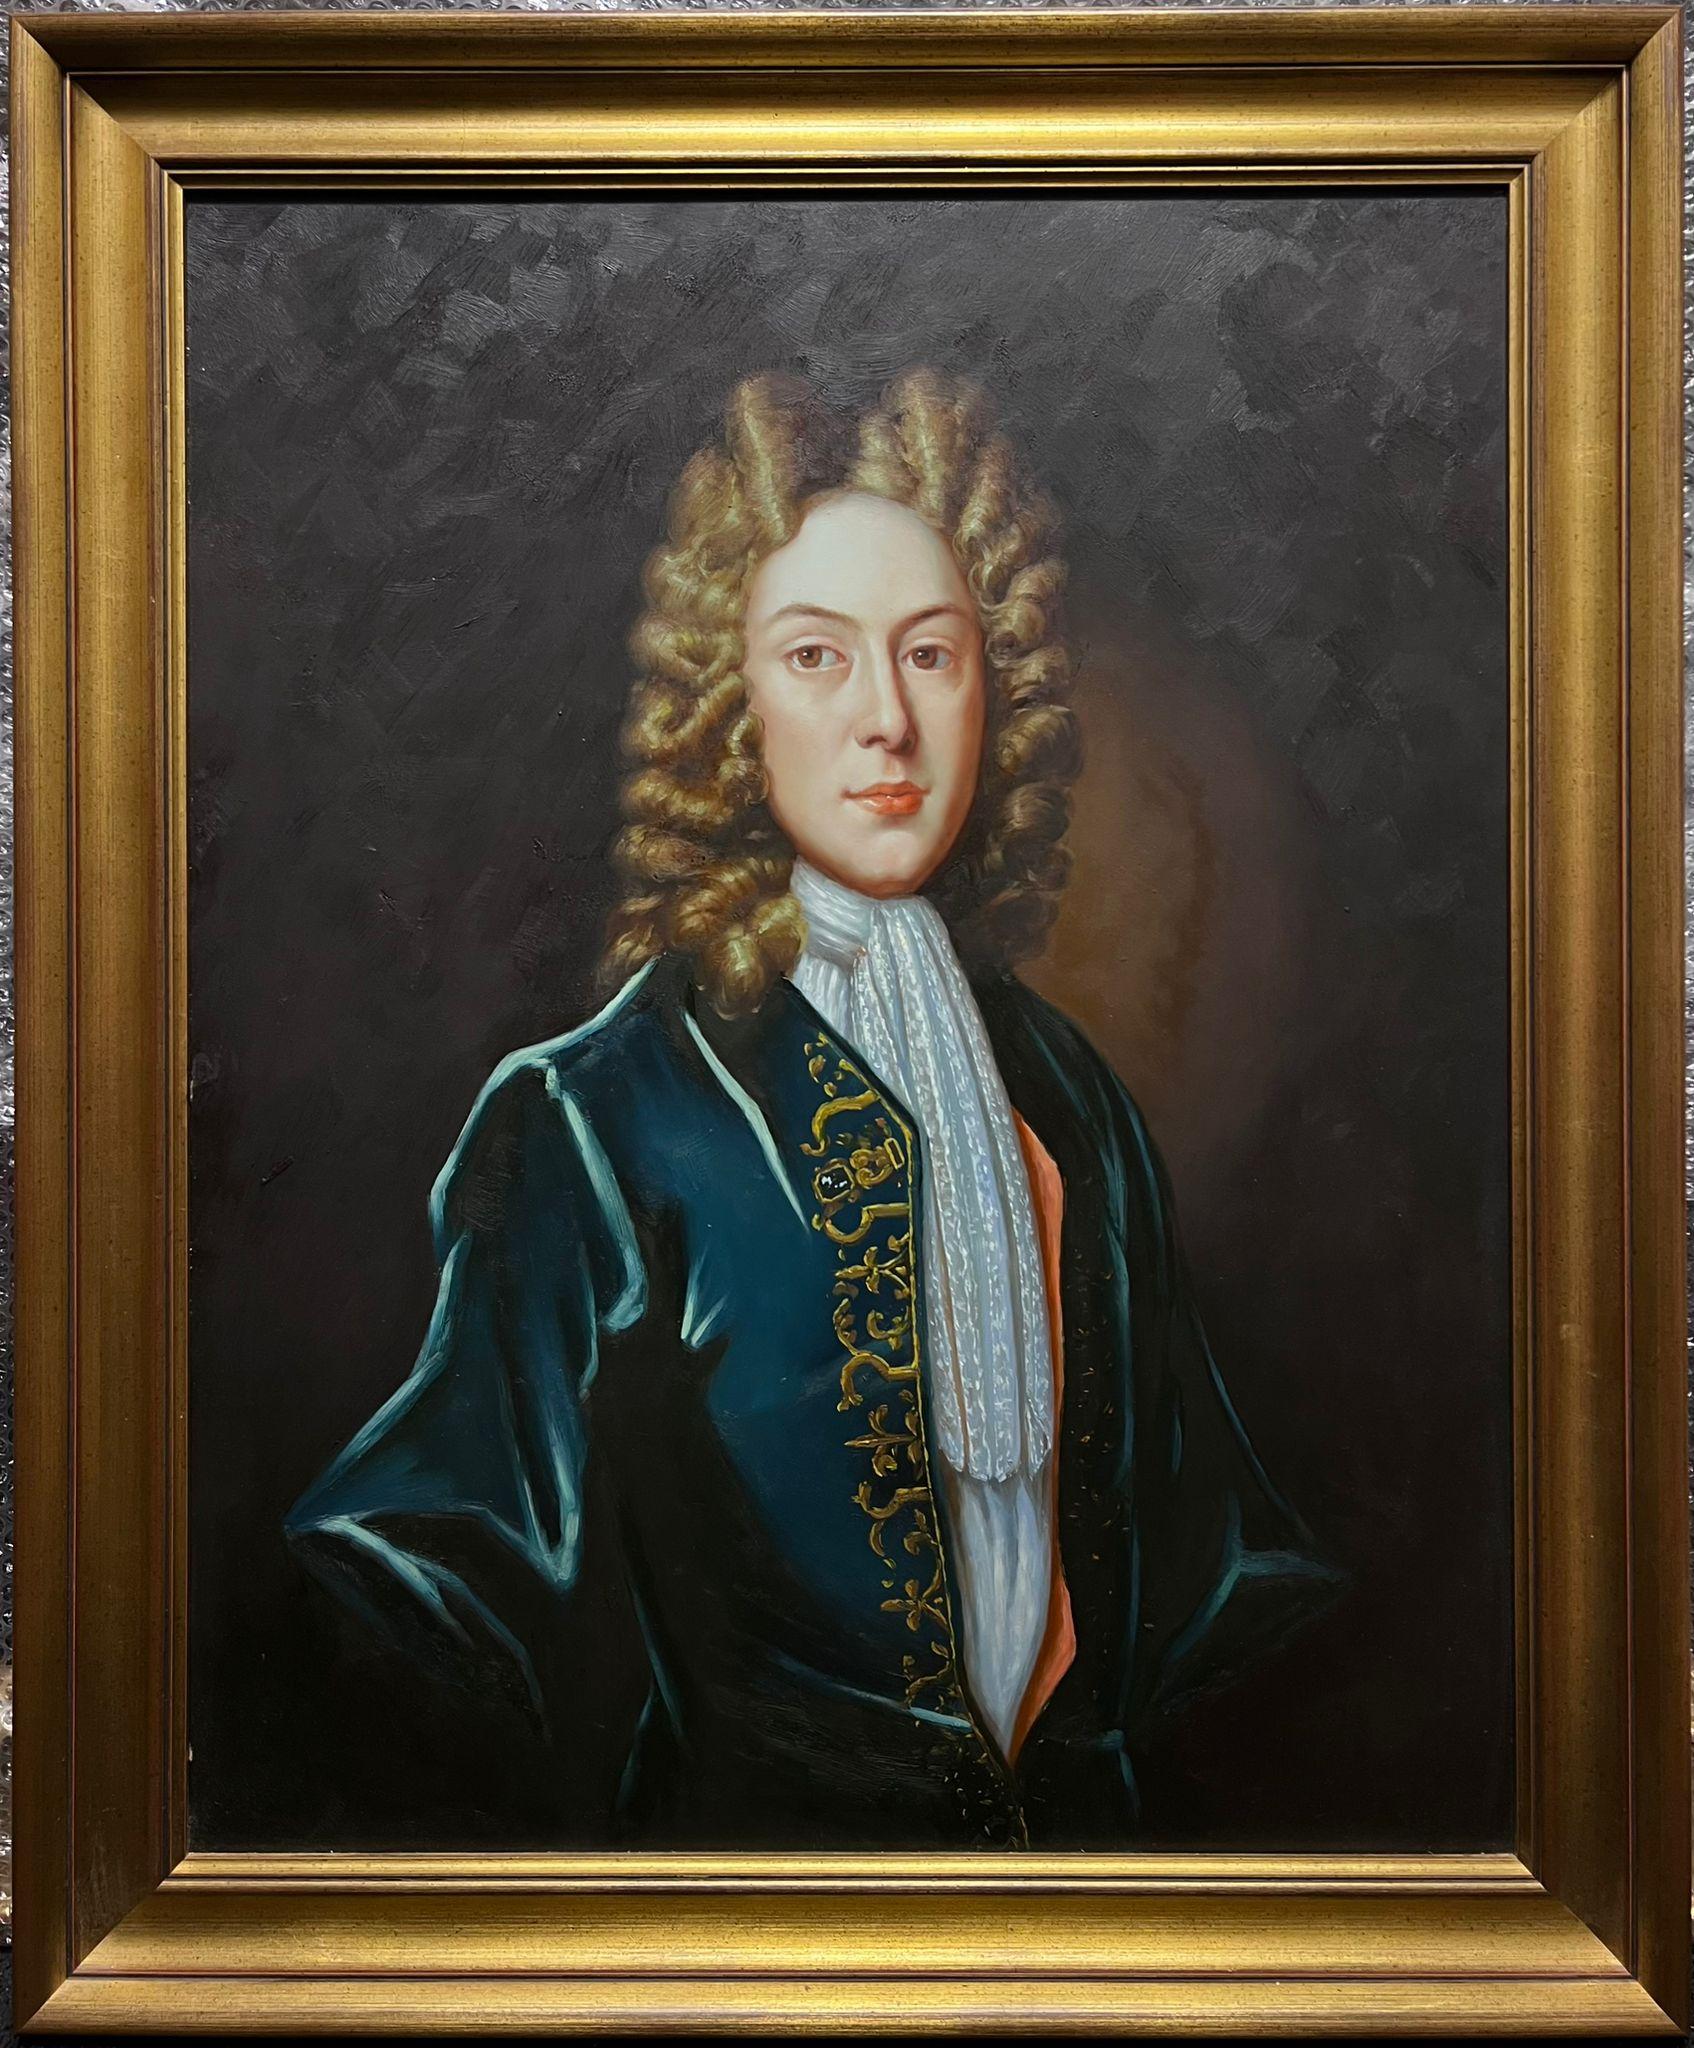 Portrait of a Nobleman
European School, 20th century (painted after an earlier style)
oil on canvas, framed
framed: 35 x 29 inches
canvas: 30 x 24 inches
provenance: private collection, East Anglia, UK
condition: very good and sound condition 